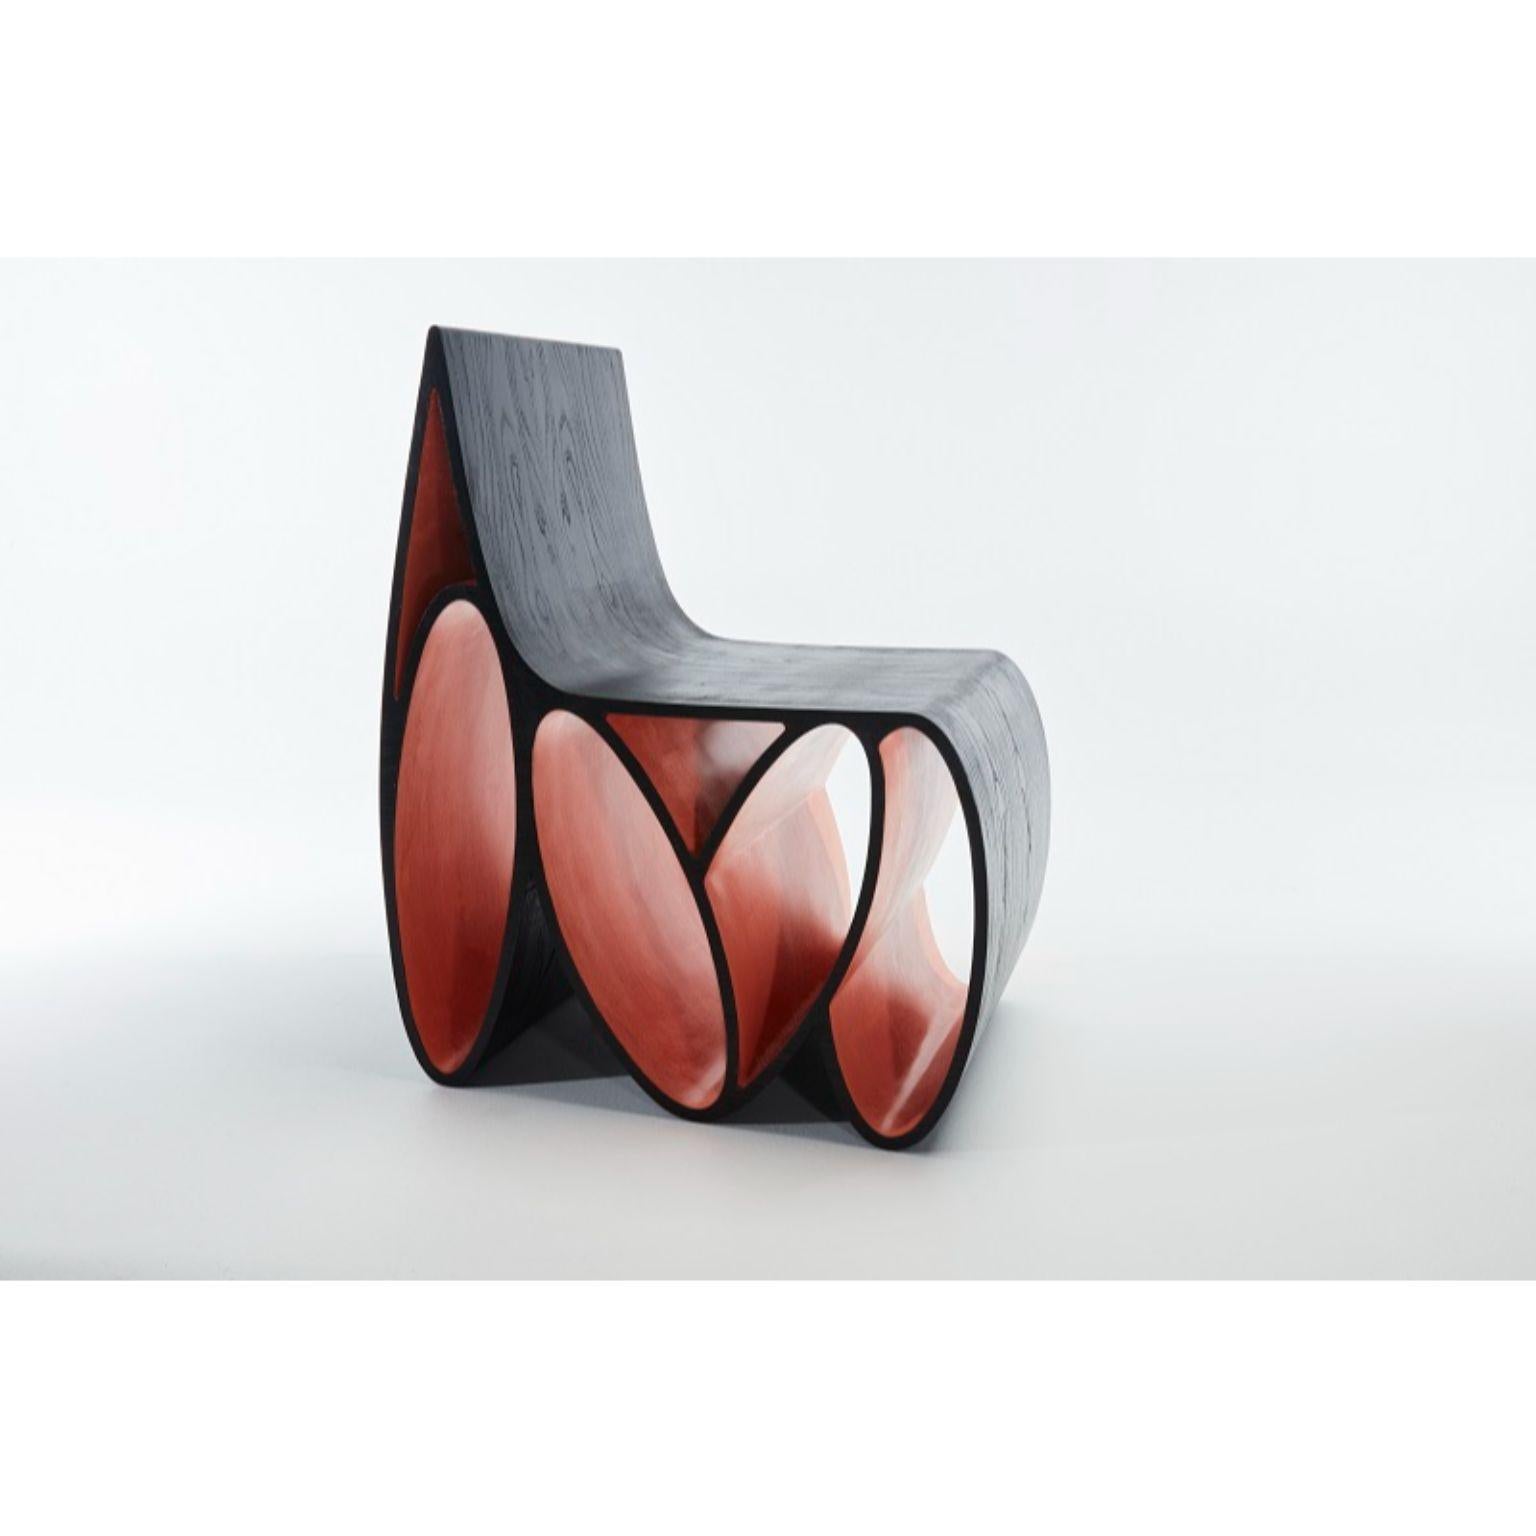 Loop chair by Jason Mizrahi
Dimensions: W 45.72, D 63.5, H 78.74 cm
Materials: Ash

Stain/Color/Finish: Customized upon request.

Jason Mizrahi is a designer of contemporary furniture. He was born and raised in Los Angeles, California. After